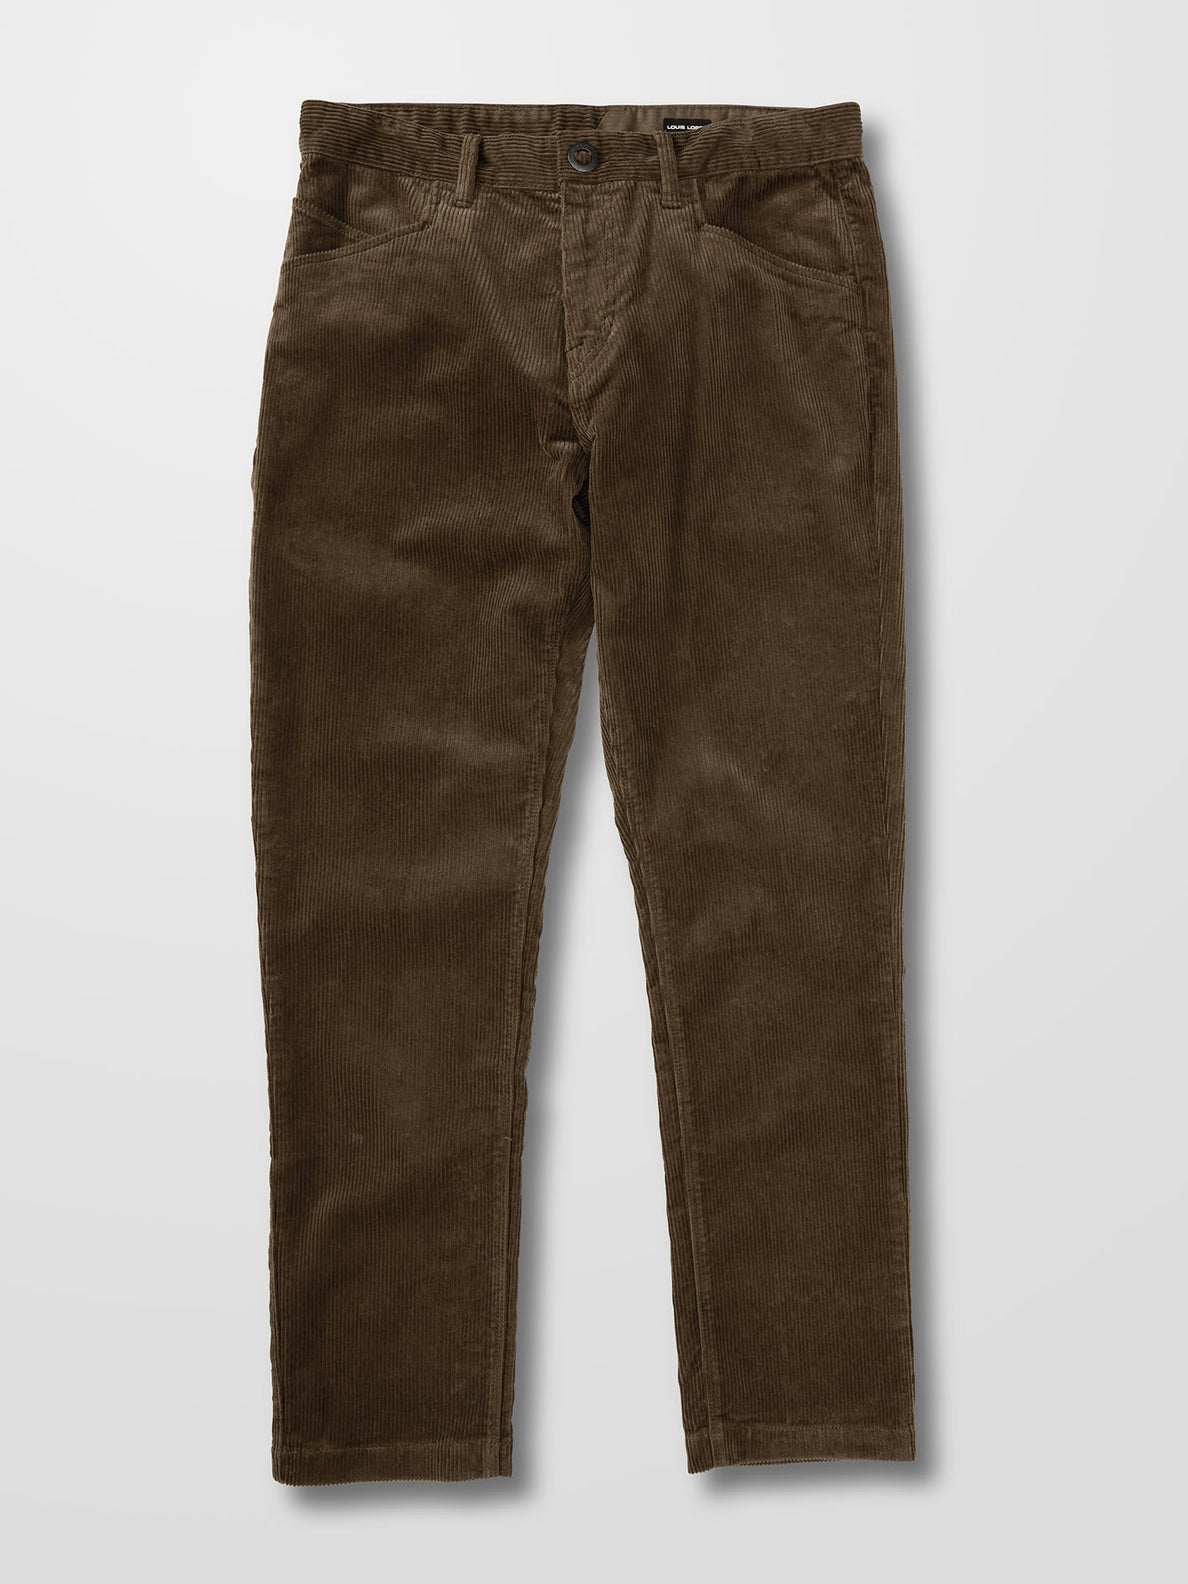 Louie Lopez Tapered Cord Pant - DARK EARTH (A1132100_DKE) [11]